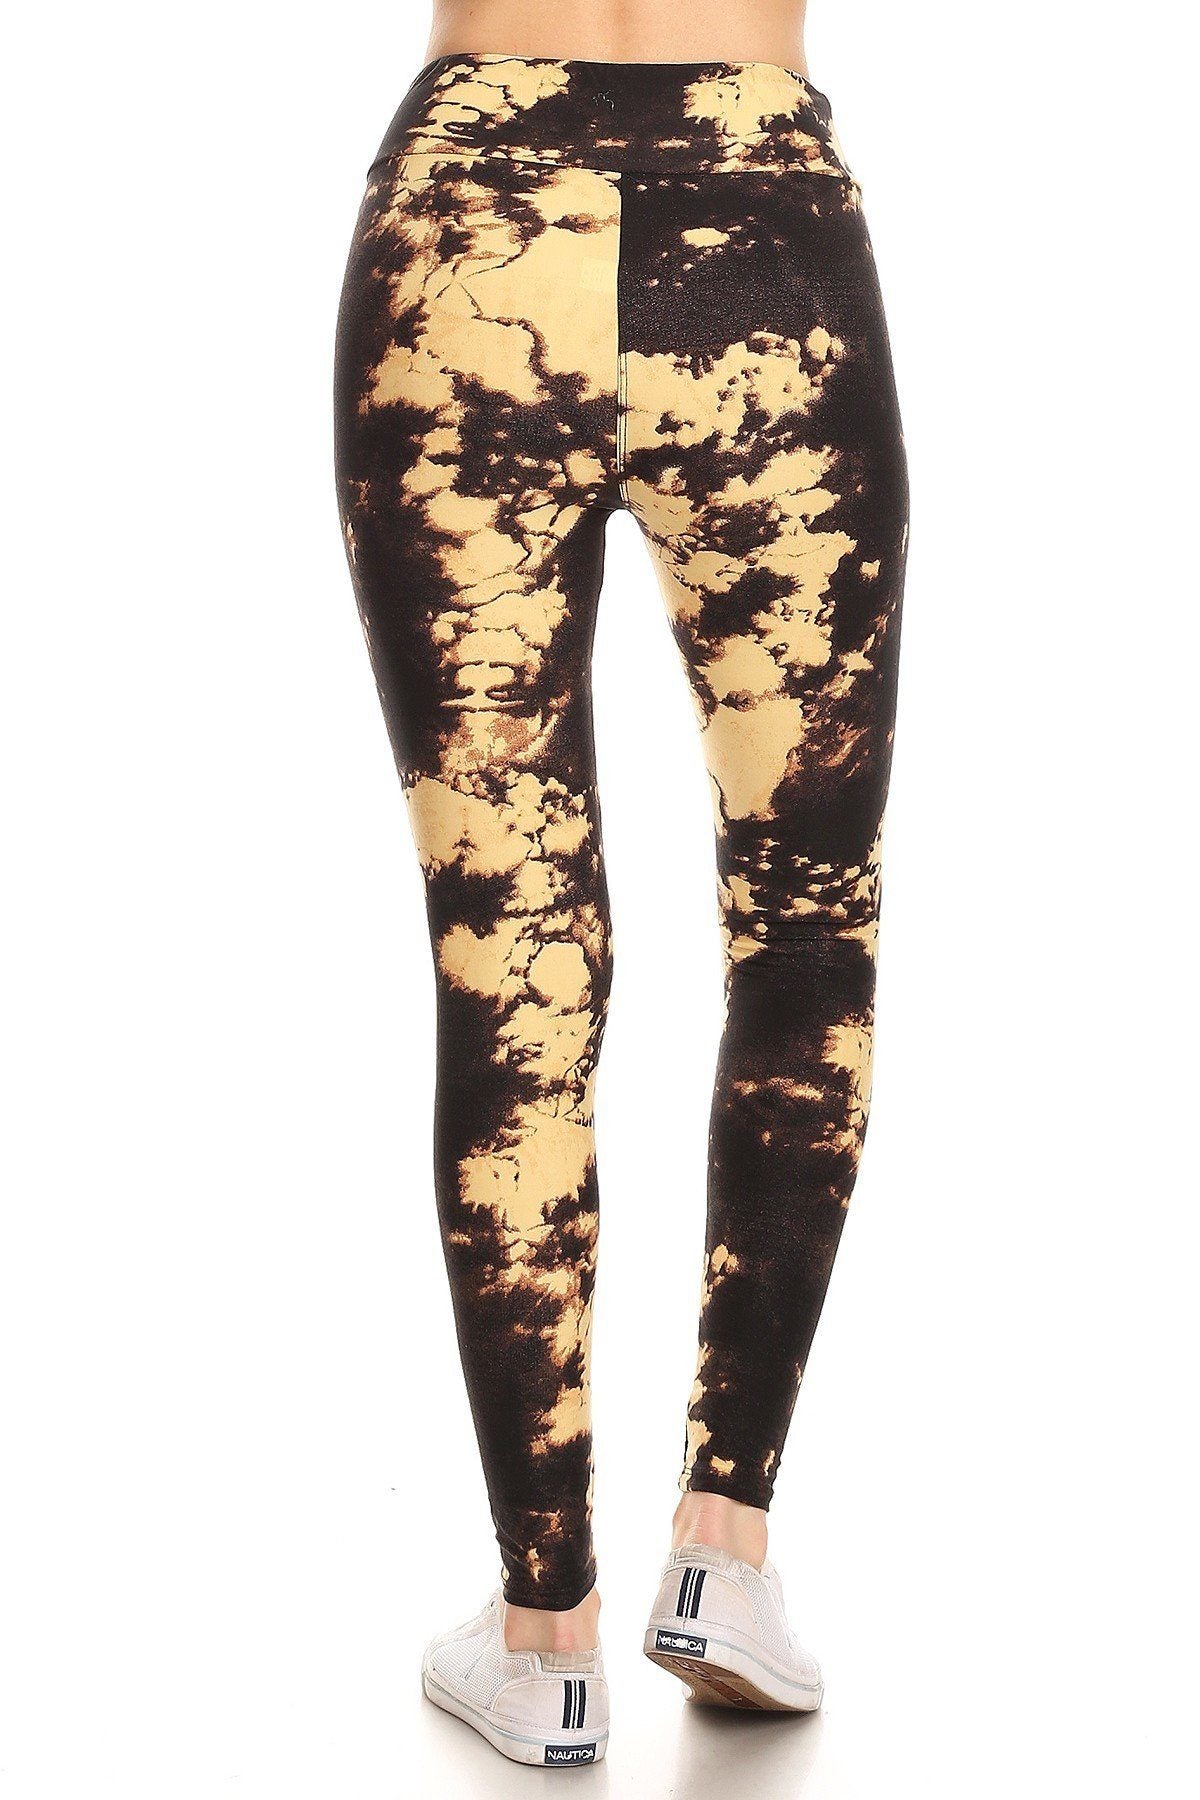 Os Yoga Style Banded Lined Tie Dye Print, Full Length Leggings In A Slim Fitting Style With A Banded High Waist.